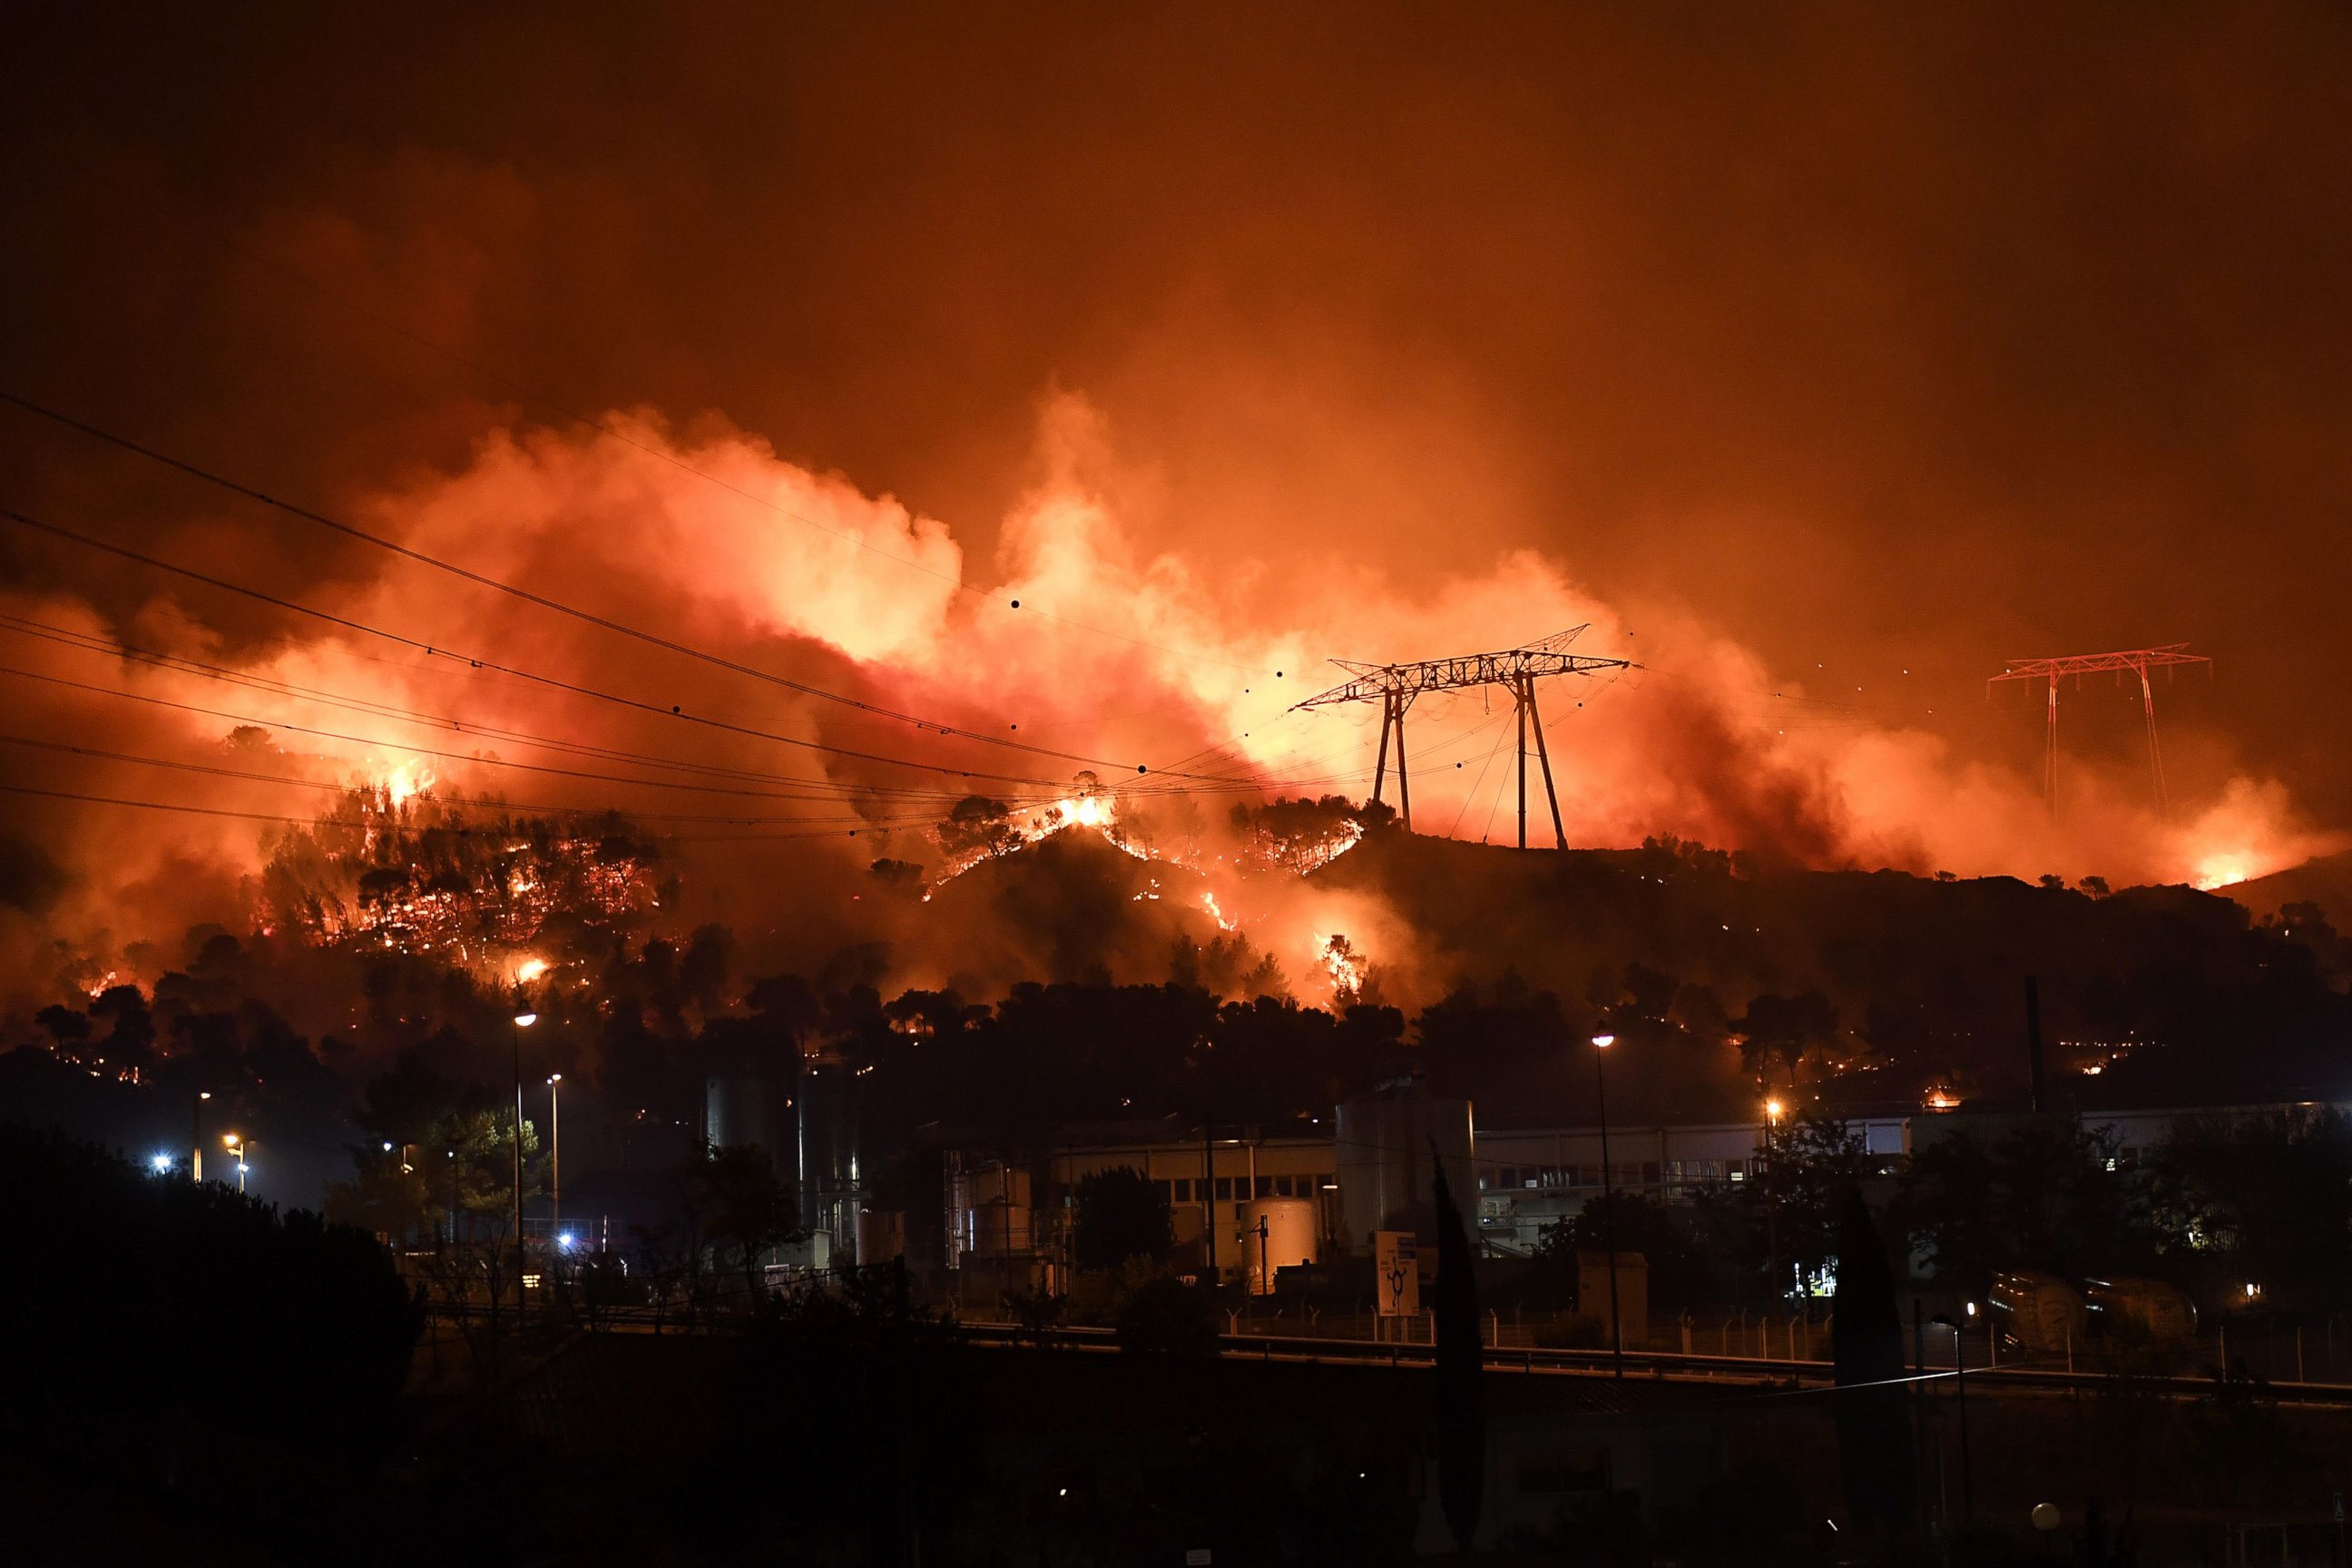 PHOTO: A fire blazes at Les Pennes-Mirabeau, near Marseille, Southern France, Aug. 11, 2016.